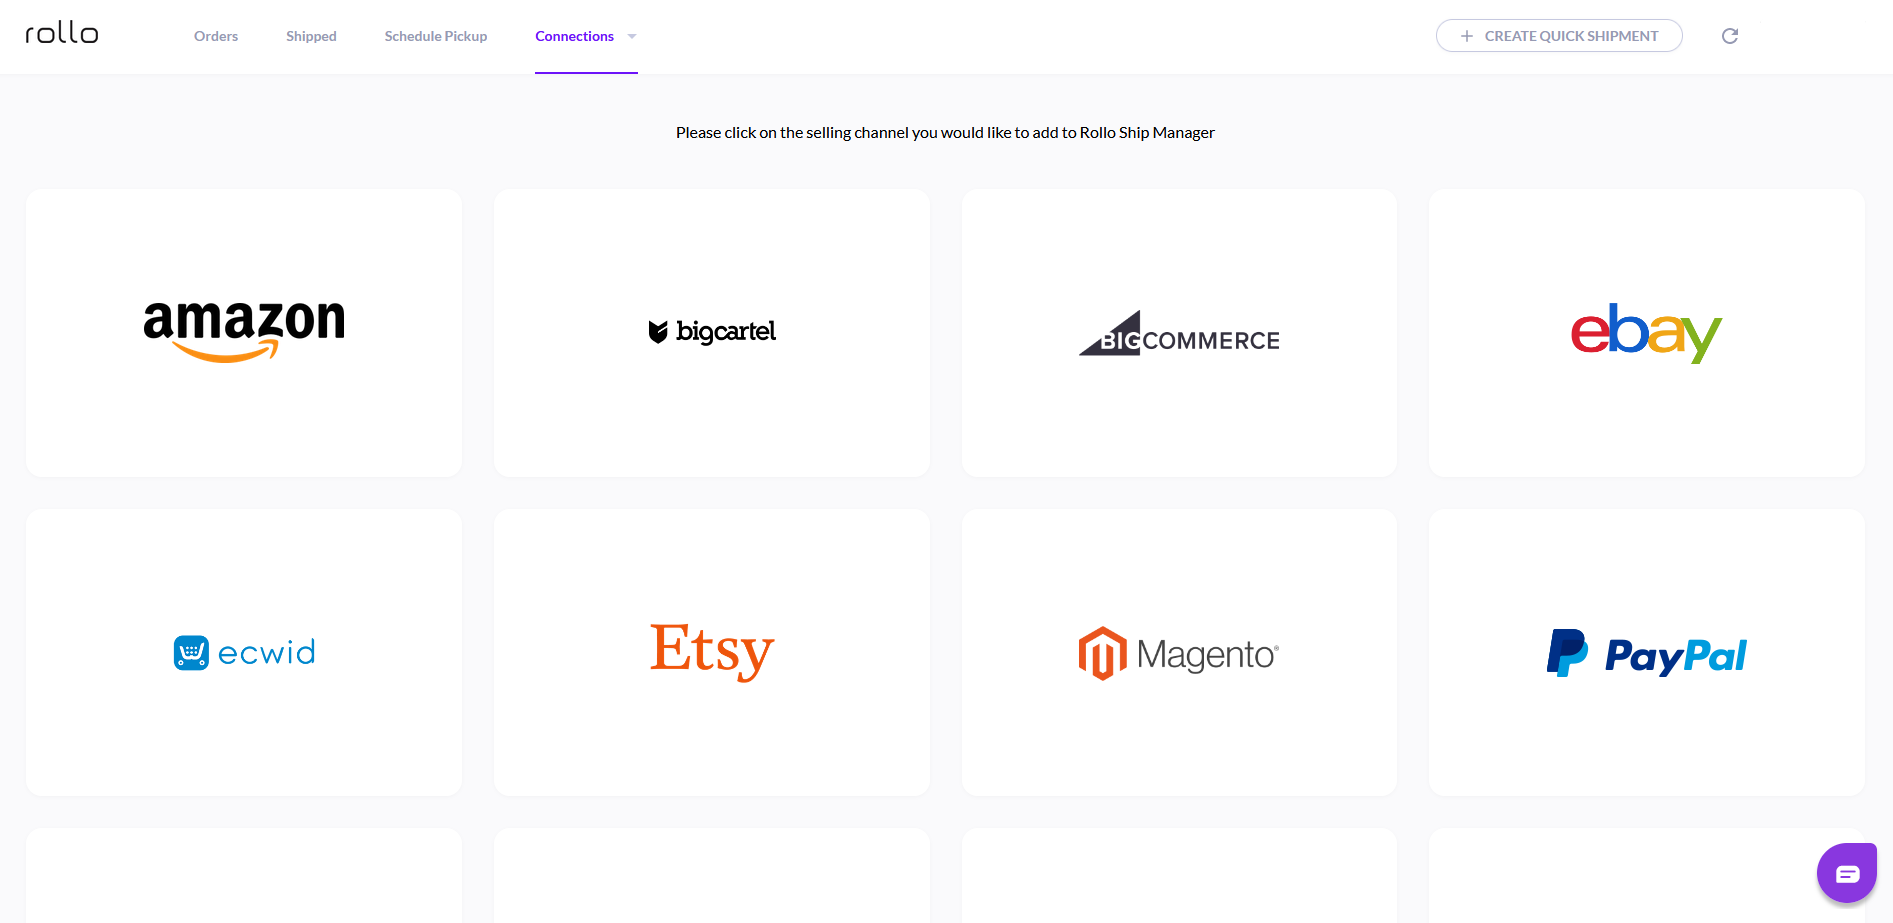 Connect your selling channels to manage and track all orders in one place.